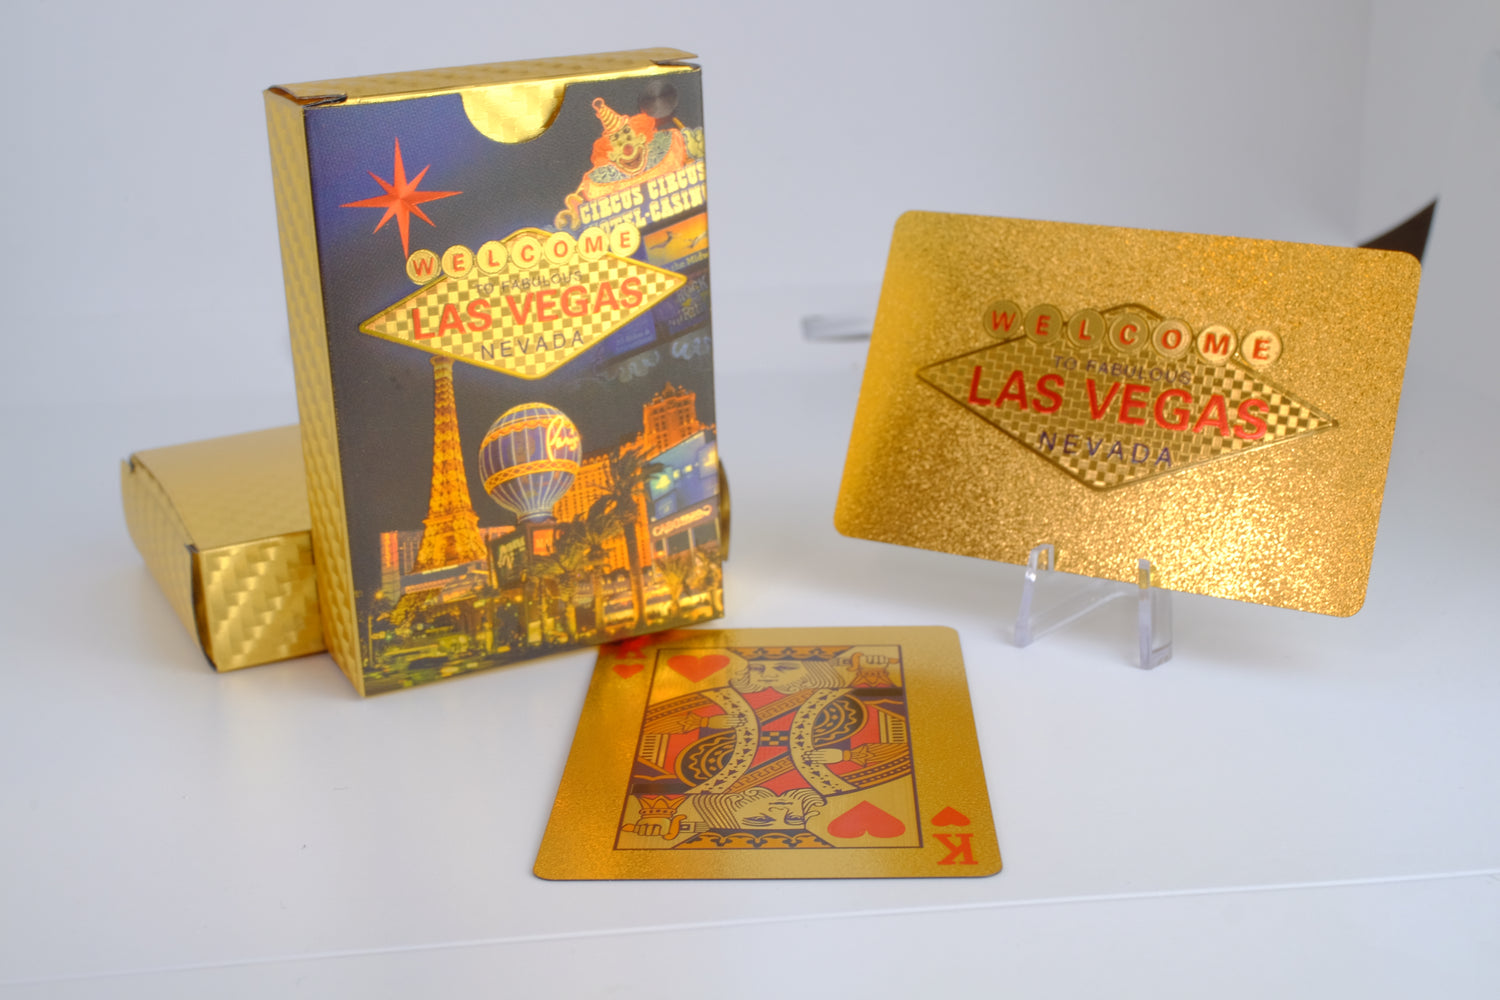 THE VENETIAN Las Vegas CASINO LIMITED EDITION GOLD PLAYING CARDS  "NEW"